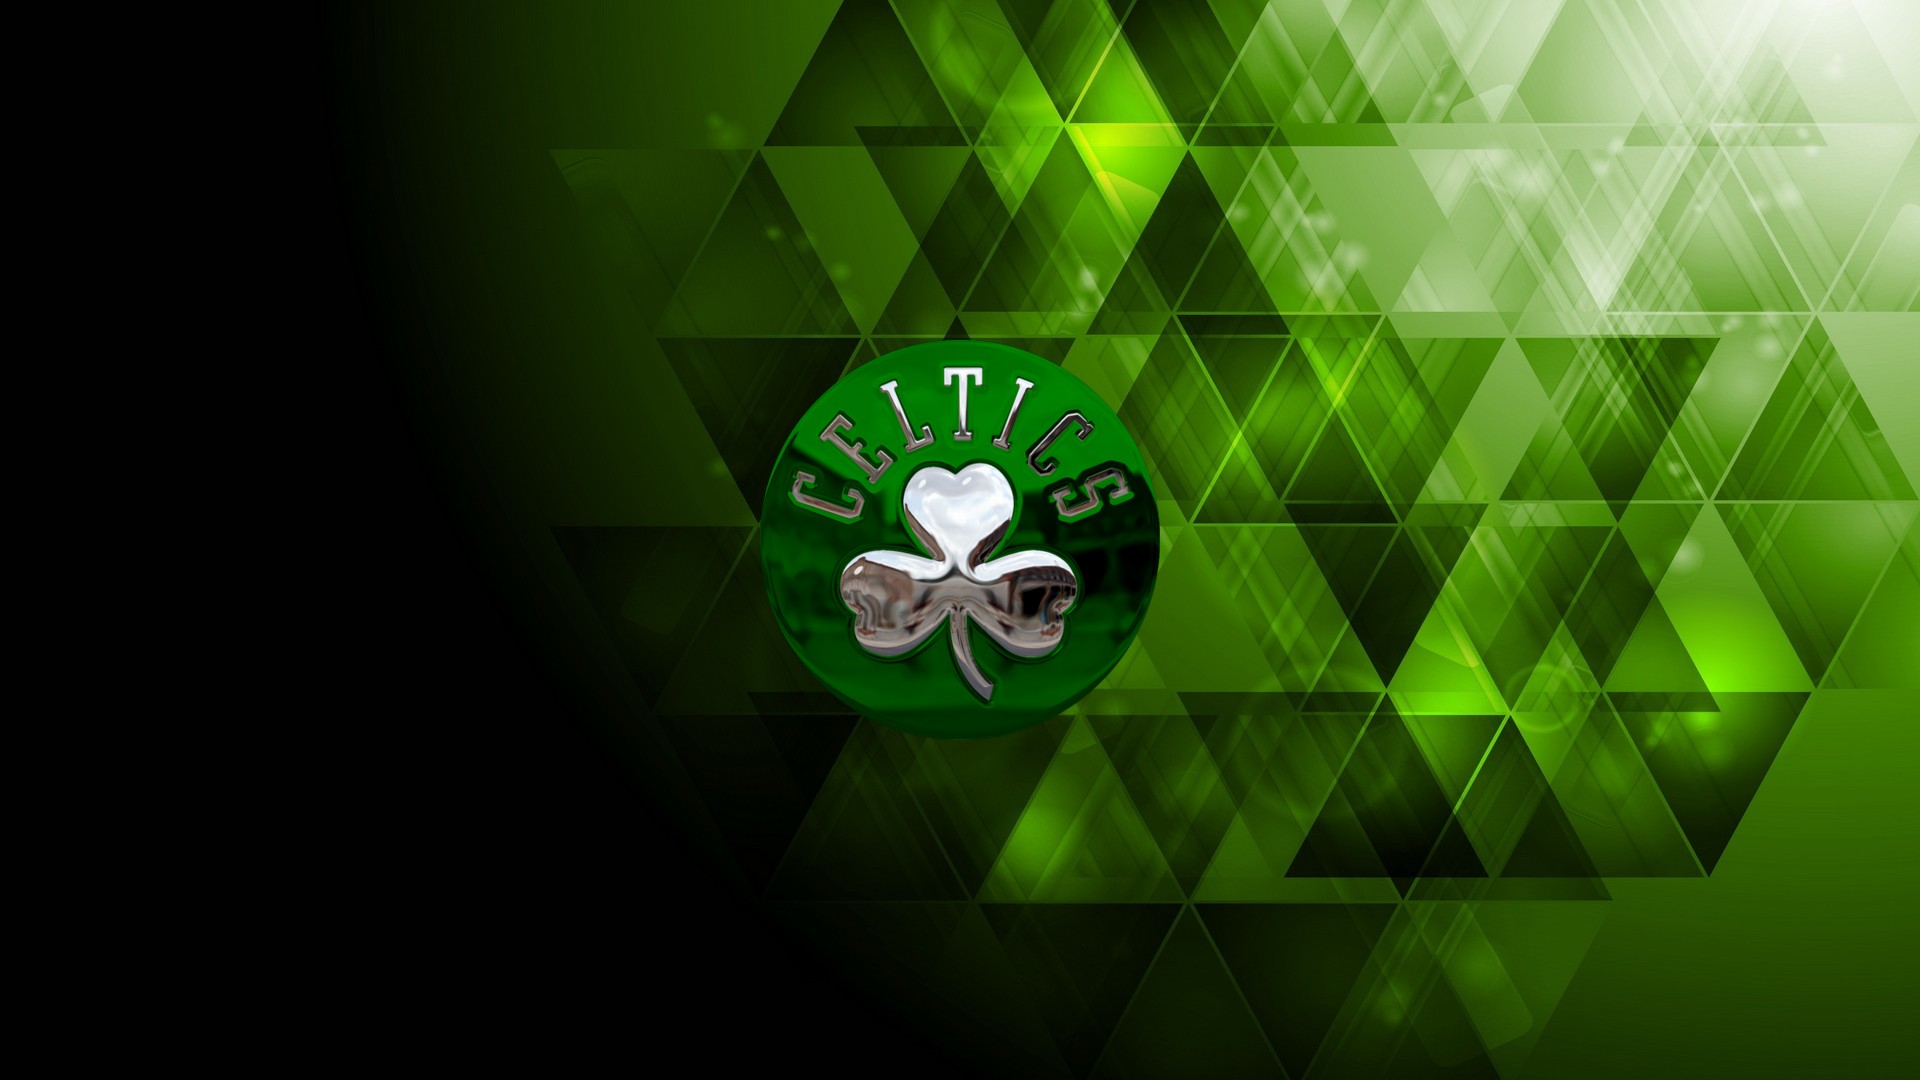 Boston Celtics HD Wallpapers with image dimensions 1920x1080 pixel. You can make this wallpaper for your Desktop Computer Backgrounds, Windows or Mac Screensavers, iPhone Lock screen, Tablet or Android and another Mobile Phone device